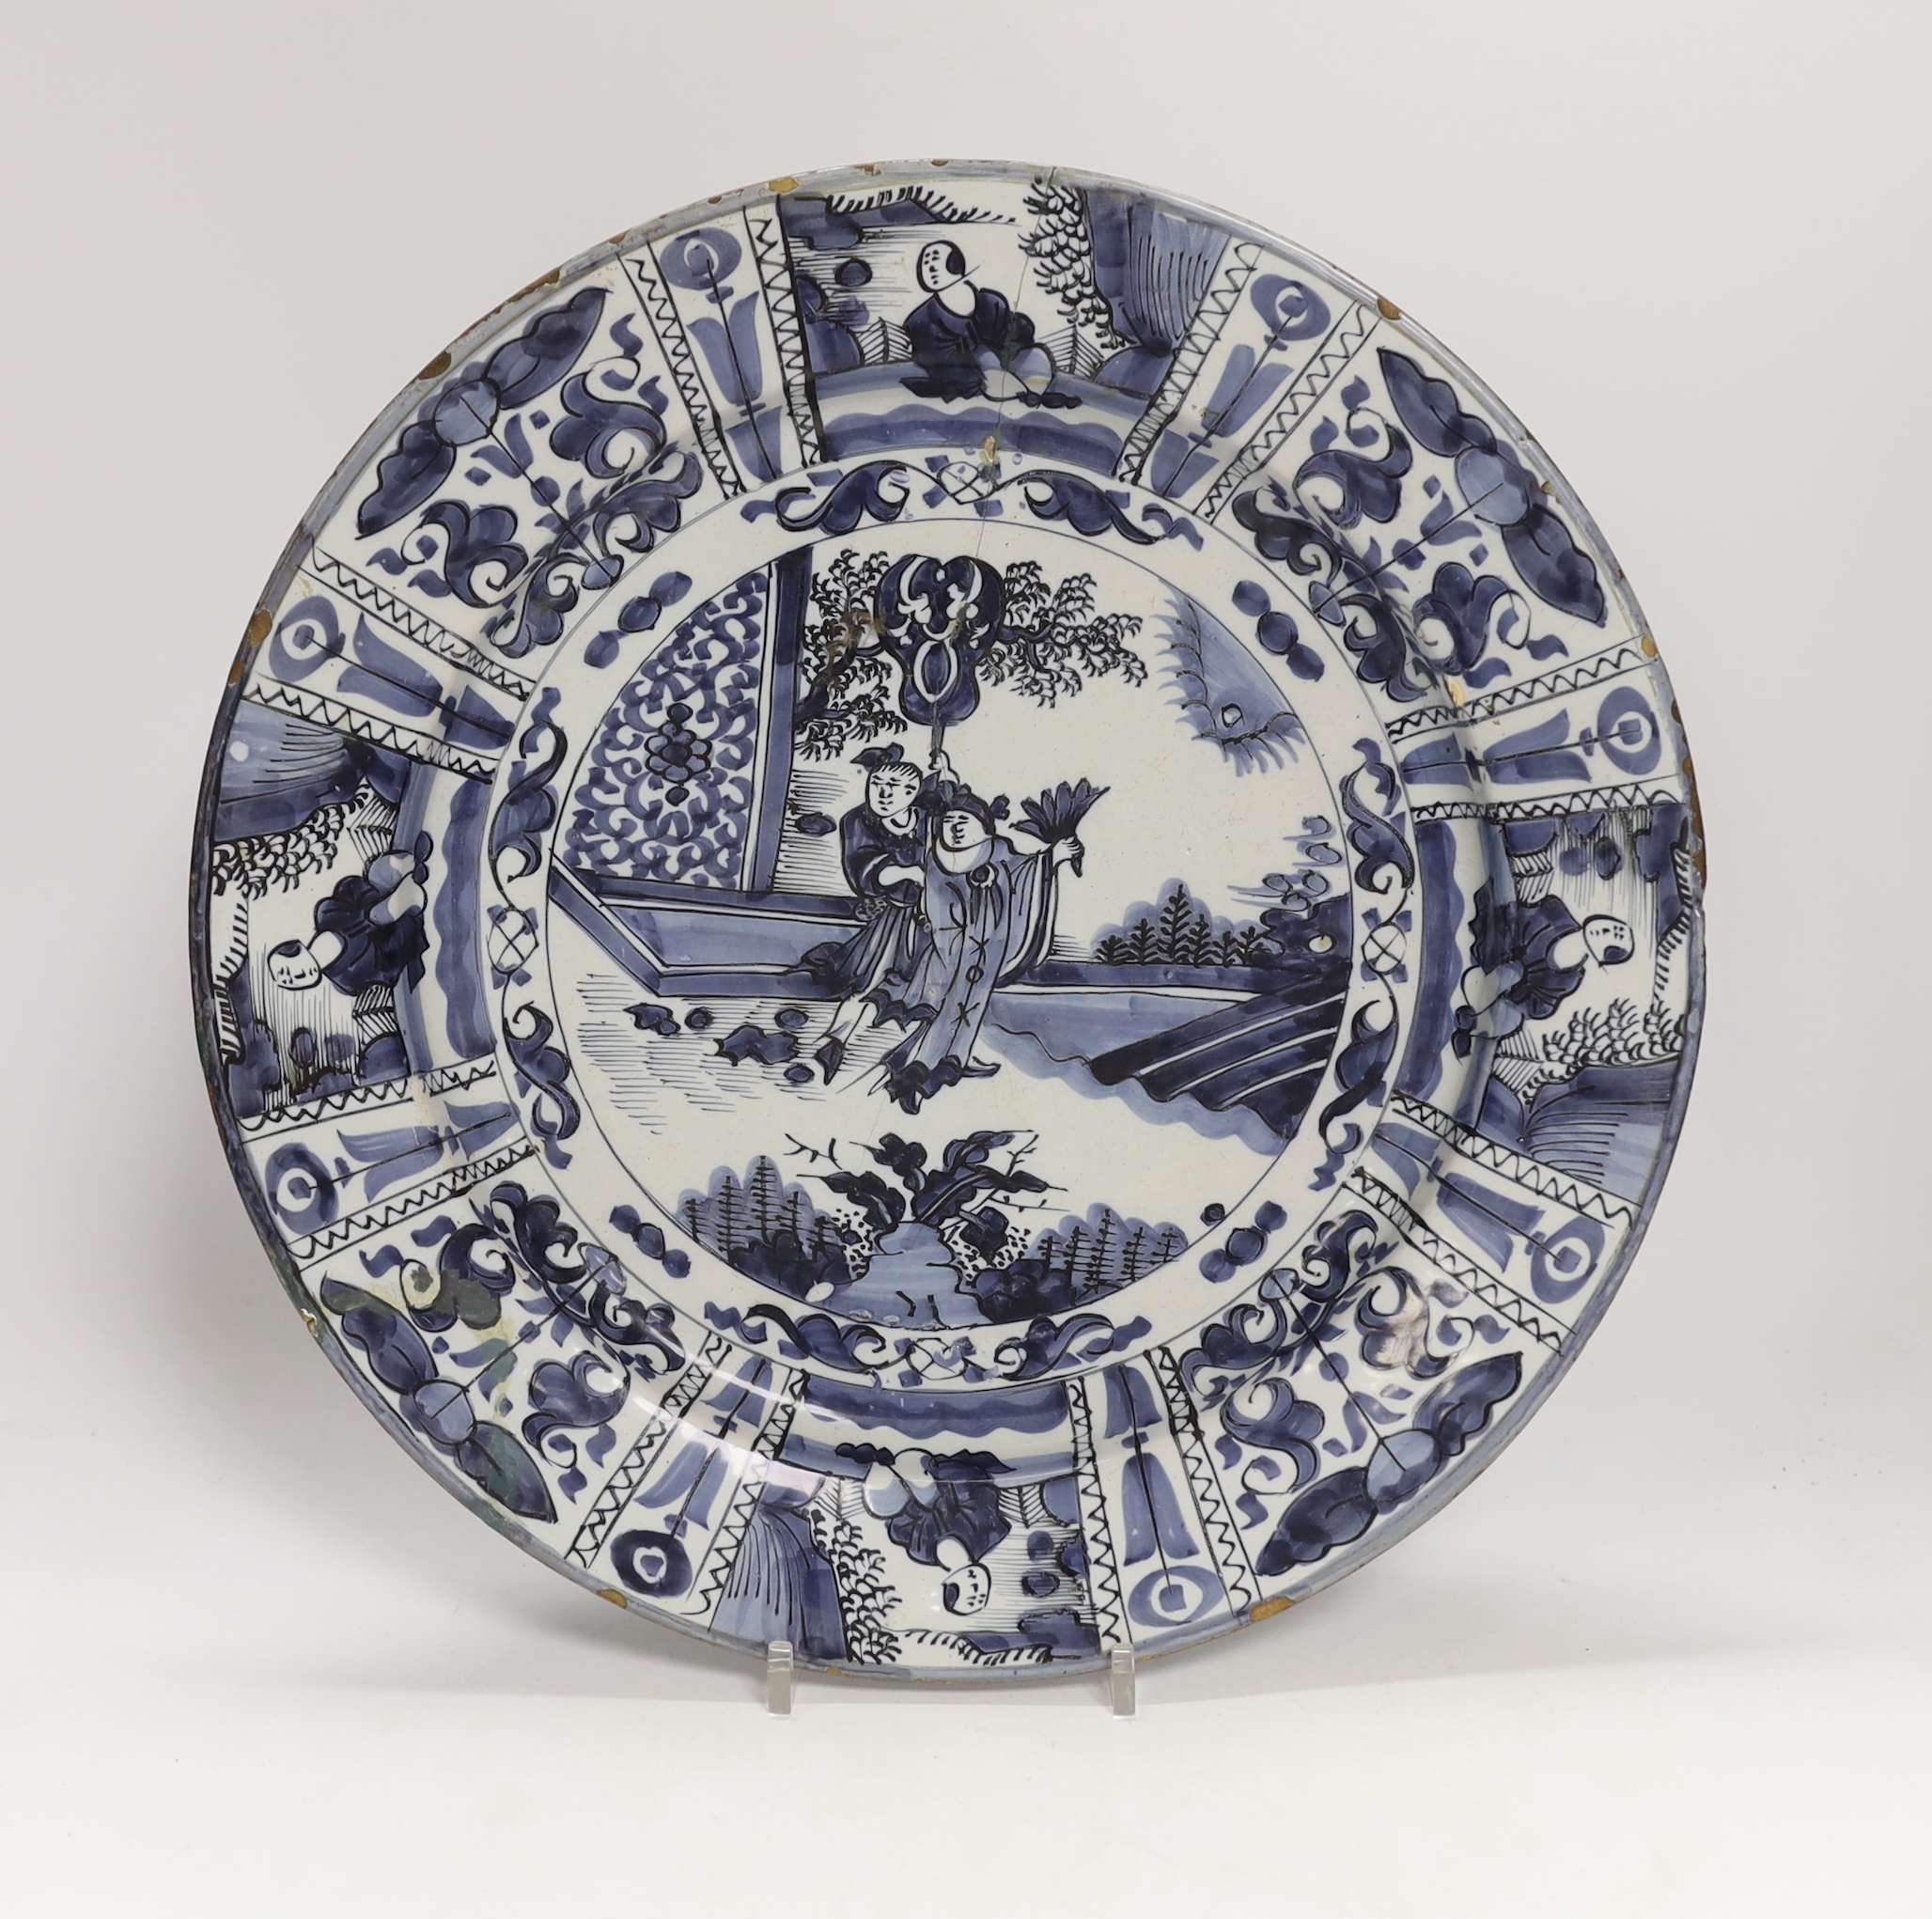 A Delft blue and white chinoiserie patterned dish, c.1700, 34cm diameter